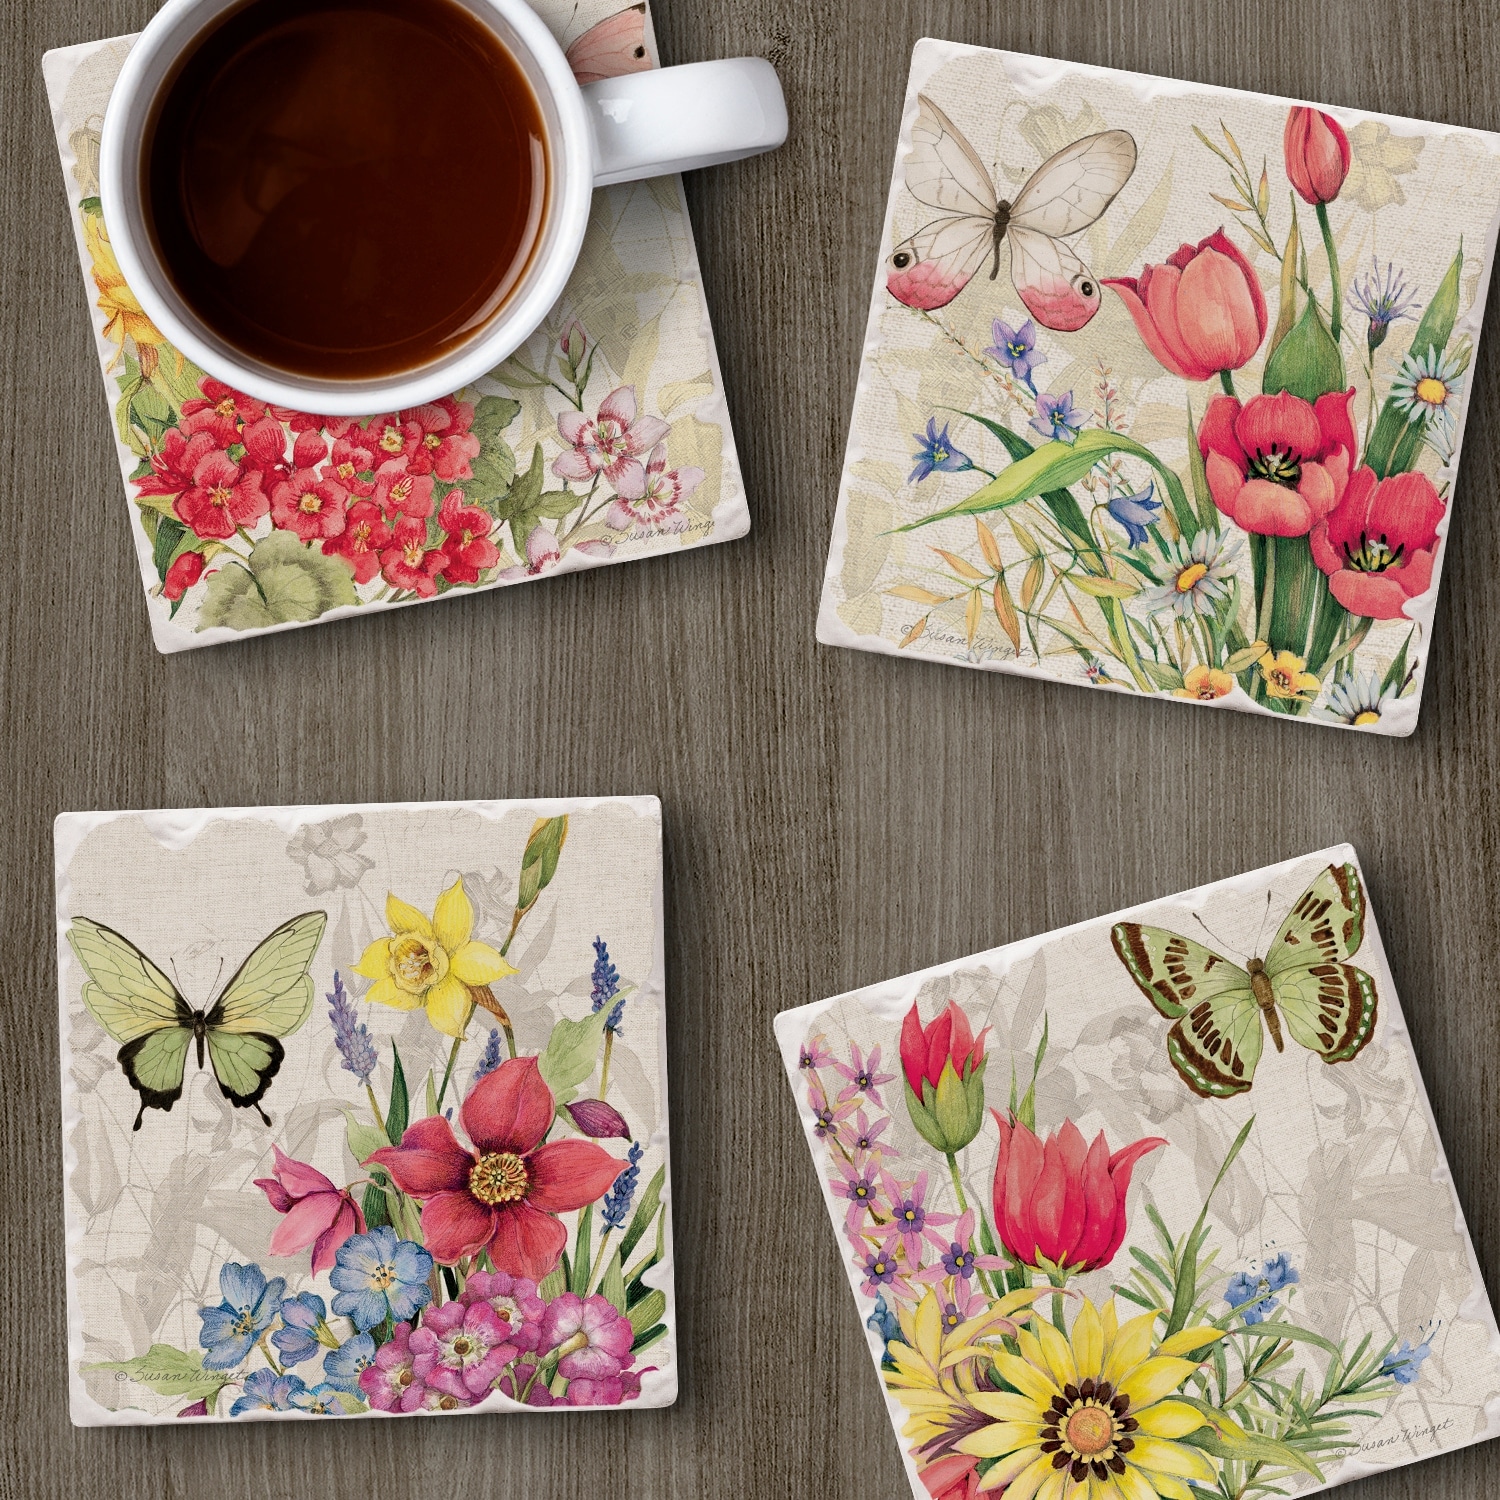 Counterart Absorbent Stone Coasters - Botanical Florals - Set of 4 - 4x4x1.167